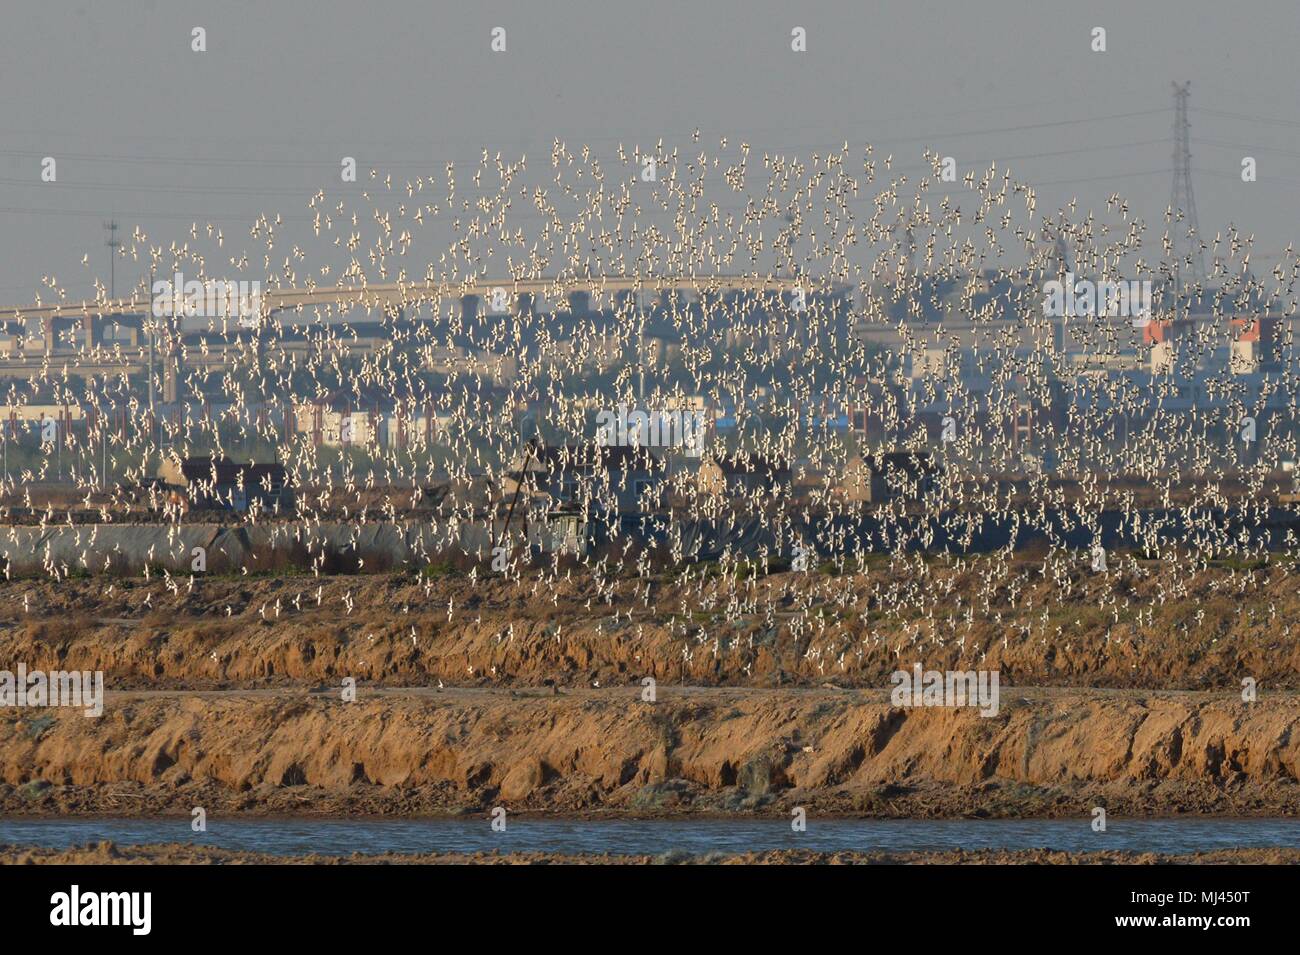 Qingdao, Qingdao, China. 4th May, 2018. Qingdao, CHINA-Thousands of dunlins fly at the wetland in Qingdao, east China's Shandong Province. The dunlin (Calidris alpina) is a small wader, sometimes separated with the other 'stints' in Erolia. Credit: SIPA Asia/ZUMA Wire/Alamy Live News Stock Photo